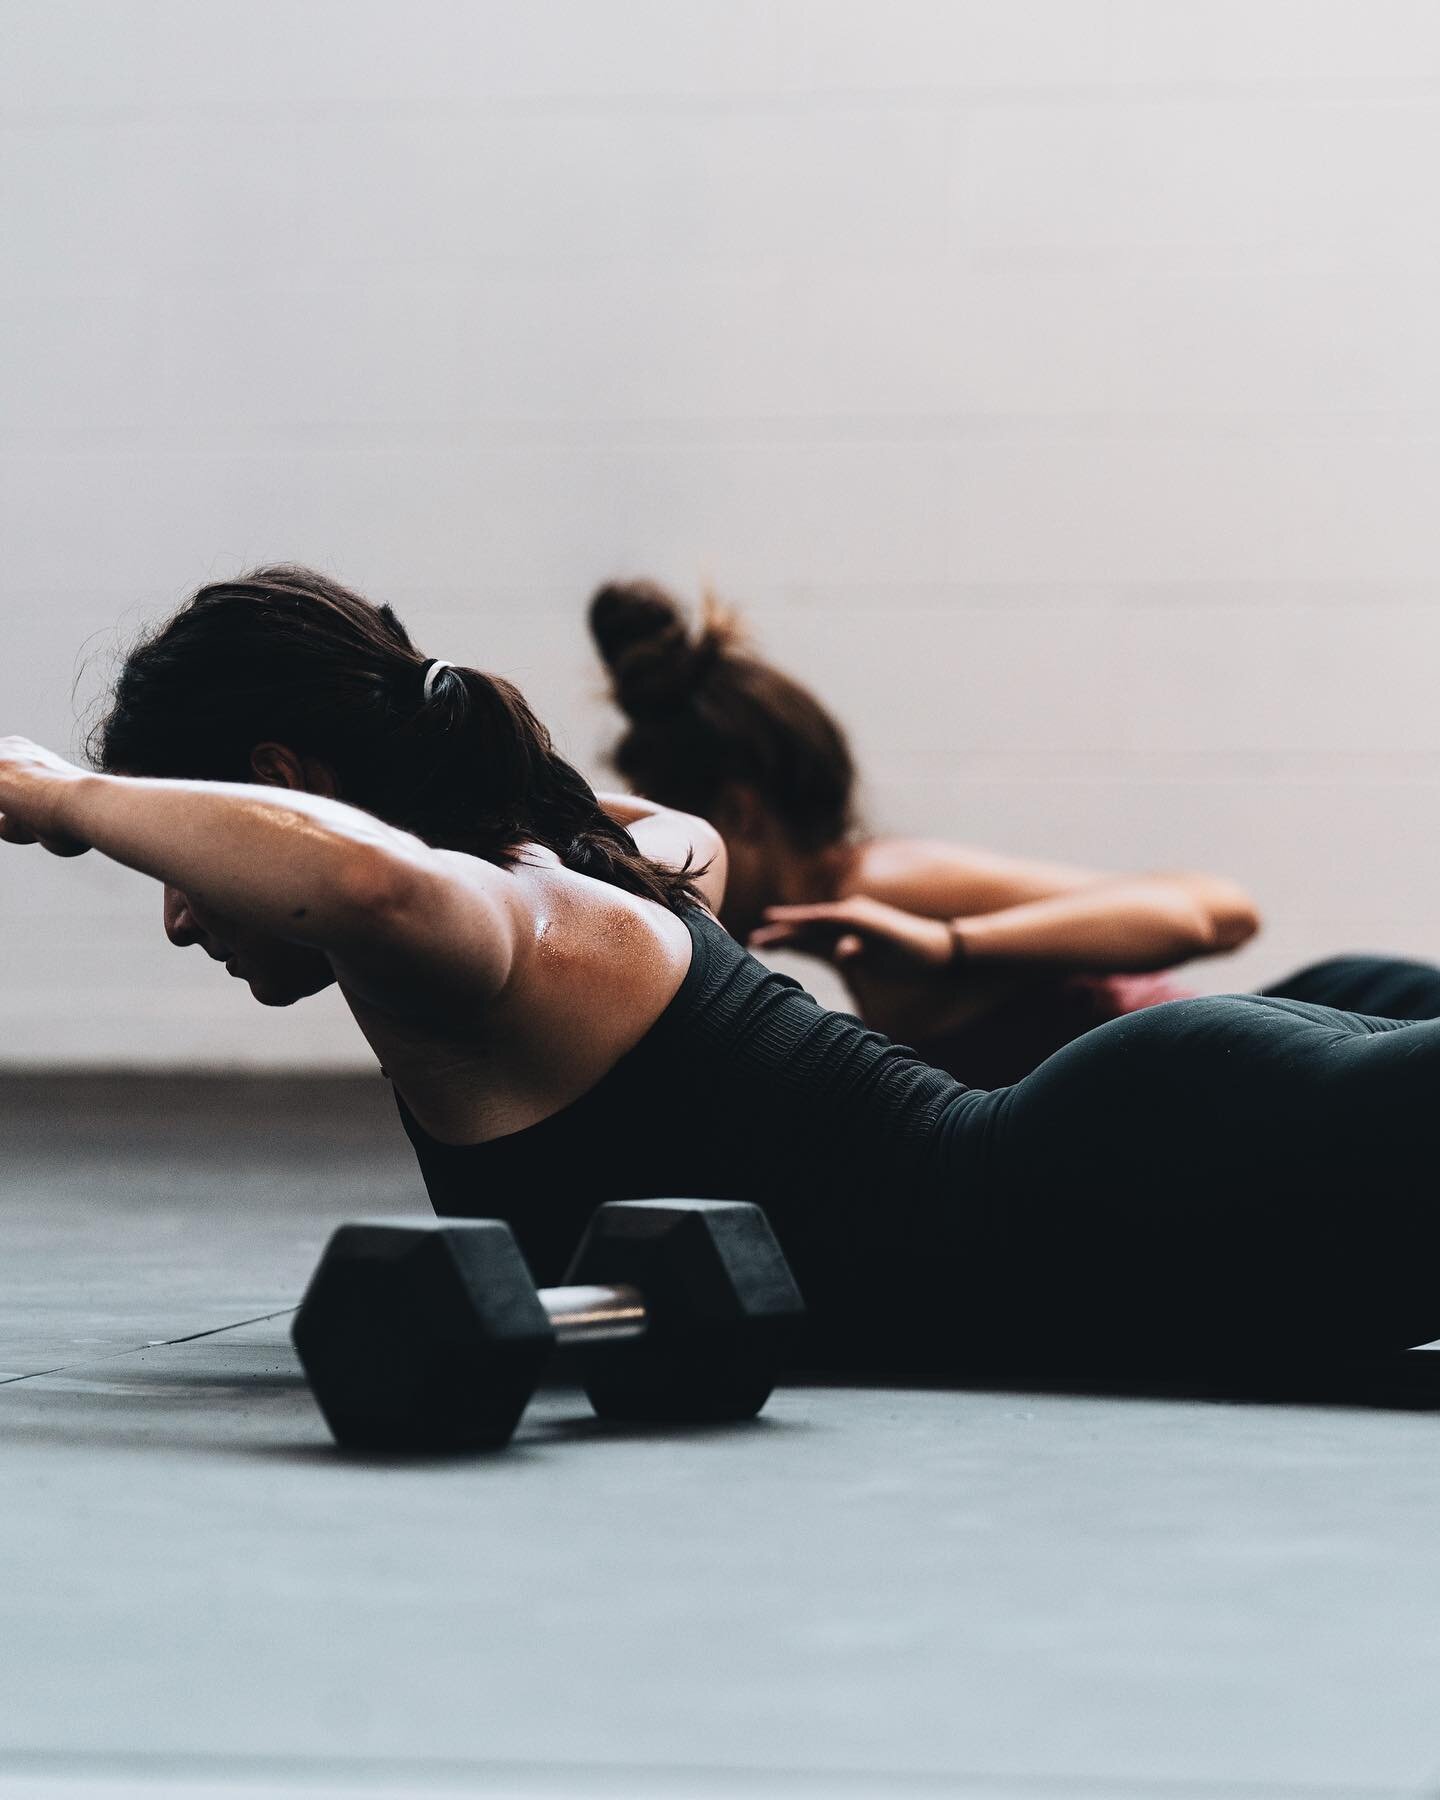 Strong Body Pilates&mdash;a limited series&mdash;starts next week! Welcome, Natasha Osses-Konig.

Tues&mdash;8 AM
Wed&mdash;6 AM
Thurs&mdash;8 AM

Space is limited! Head to the website to register for the series at a discount. Drop-ins available next